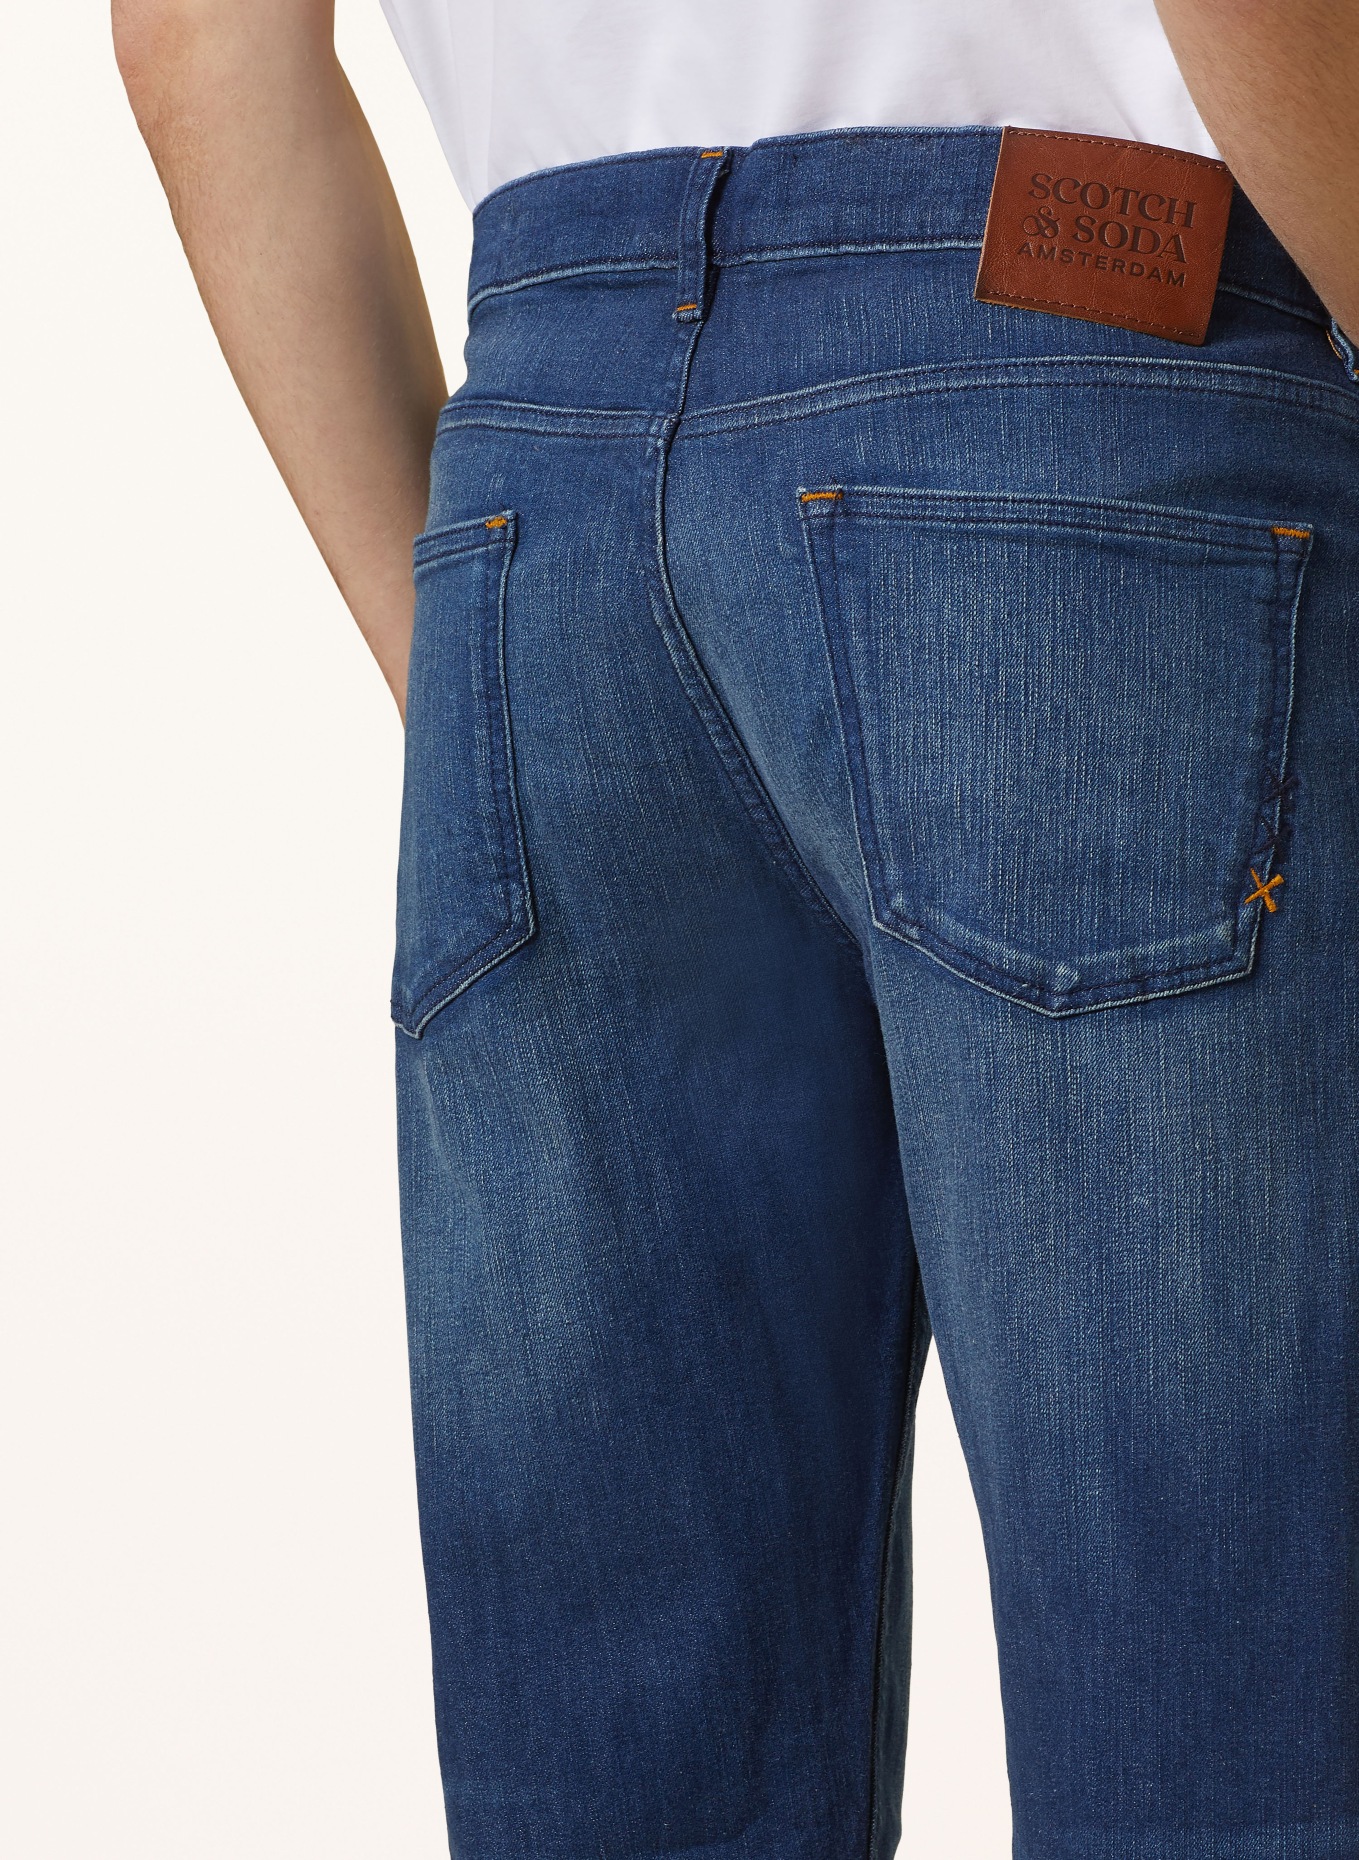 SCOTCH & SODA Jeans regular tapered fit, Color: 7056 Scenic Blauw (Image 6)